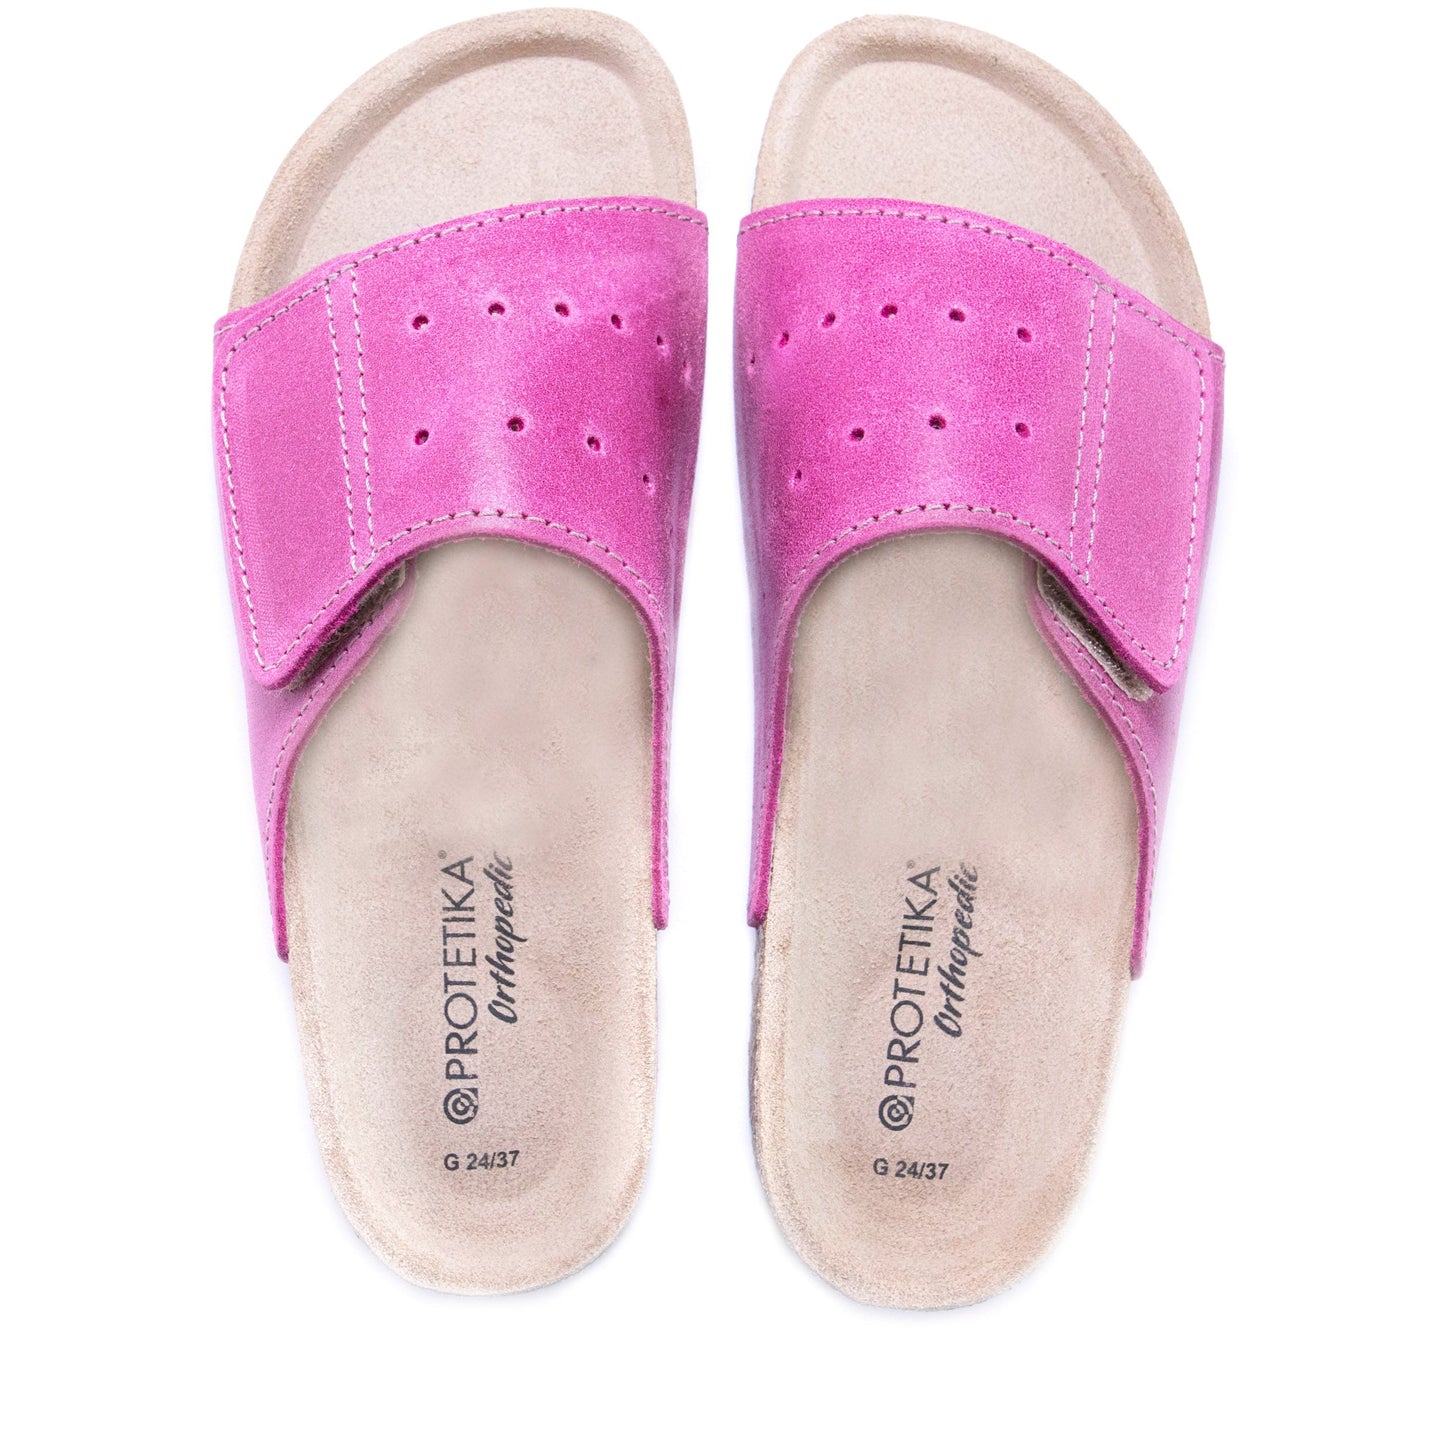 T56: color 80 - pink ladies orthotic sandals - feelgoodshoes.ae